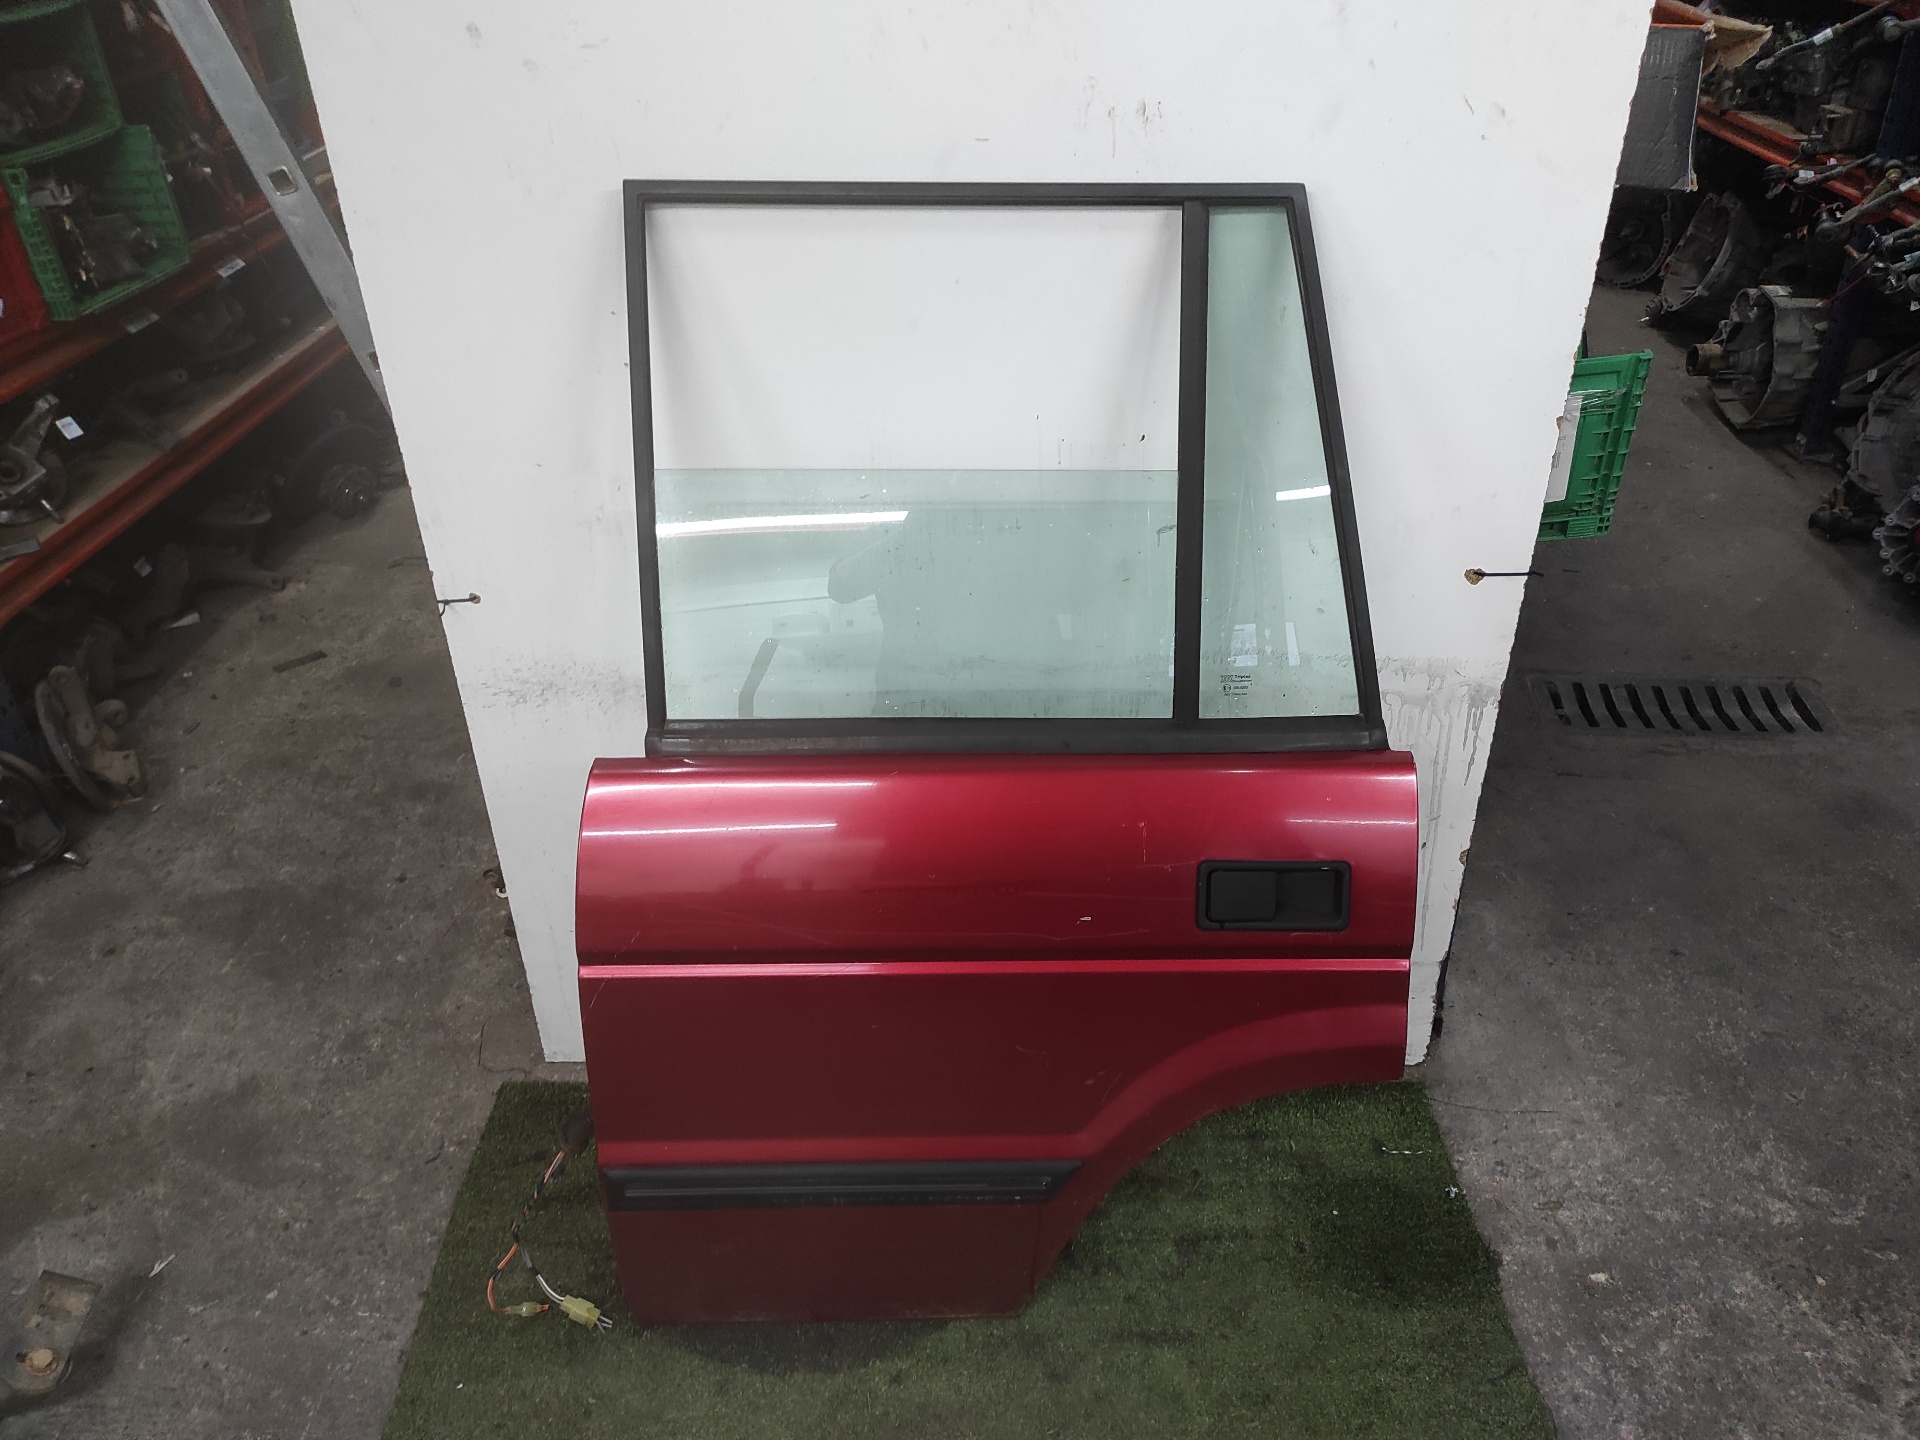 LAND ROVER Discovery 1 generation (1989-1997) Rear Left Door D21L 22538694